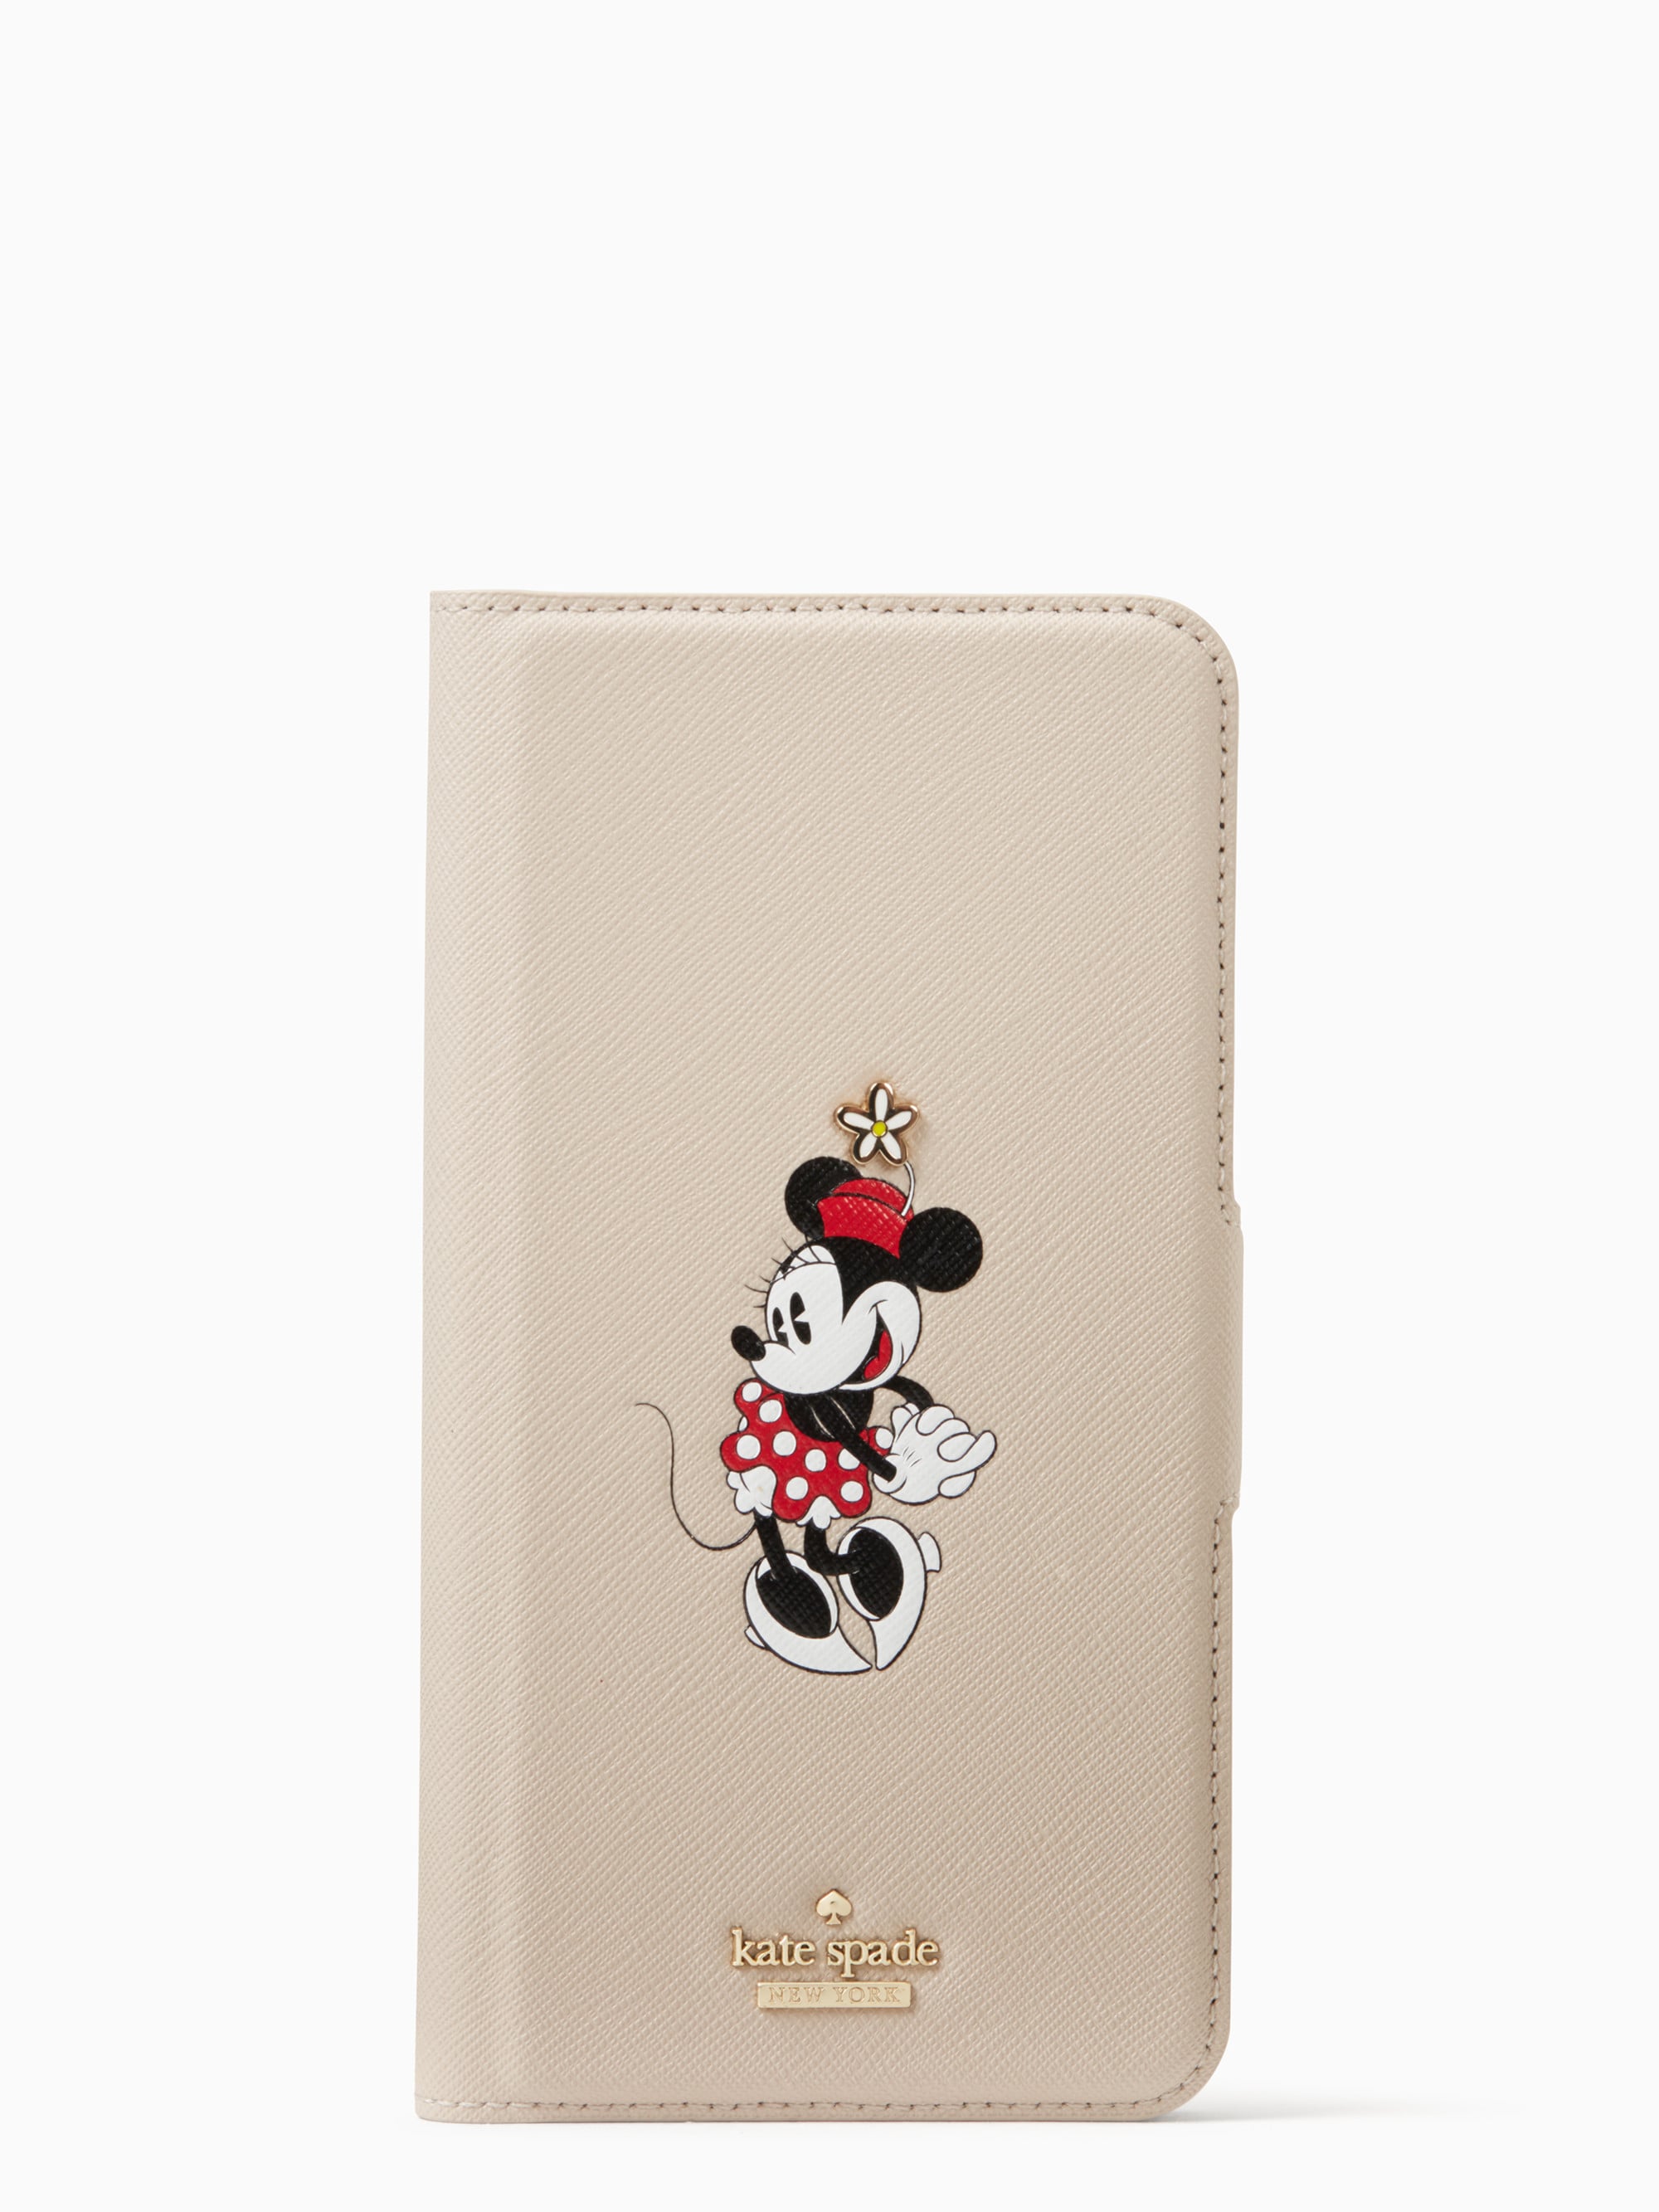 Kate Spade for Minnie Mouse Folio iPhone 7/8 Plus Case | We Really Want  Everything From Kate Spade's New Minnie Mouse Collection | POPSUGAR Fashion  Photo 11